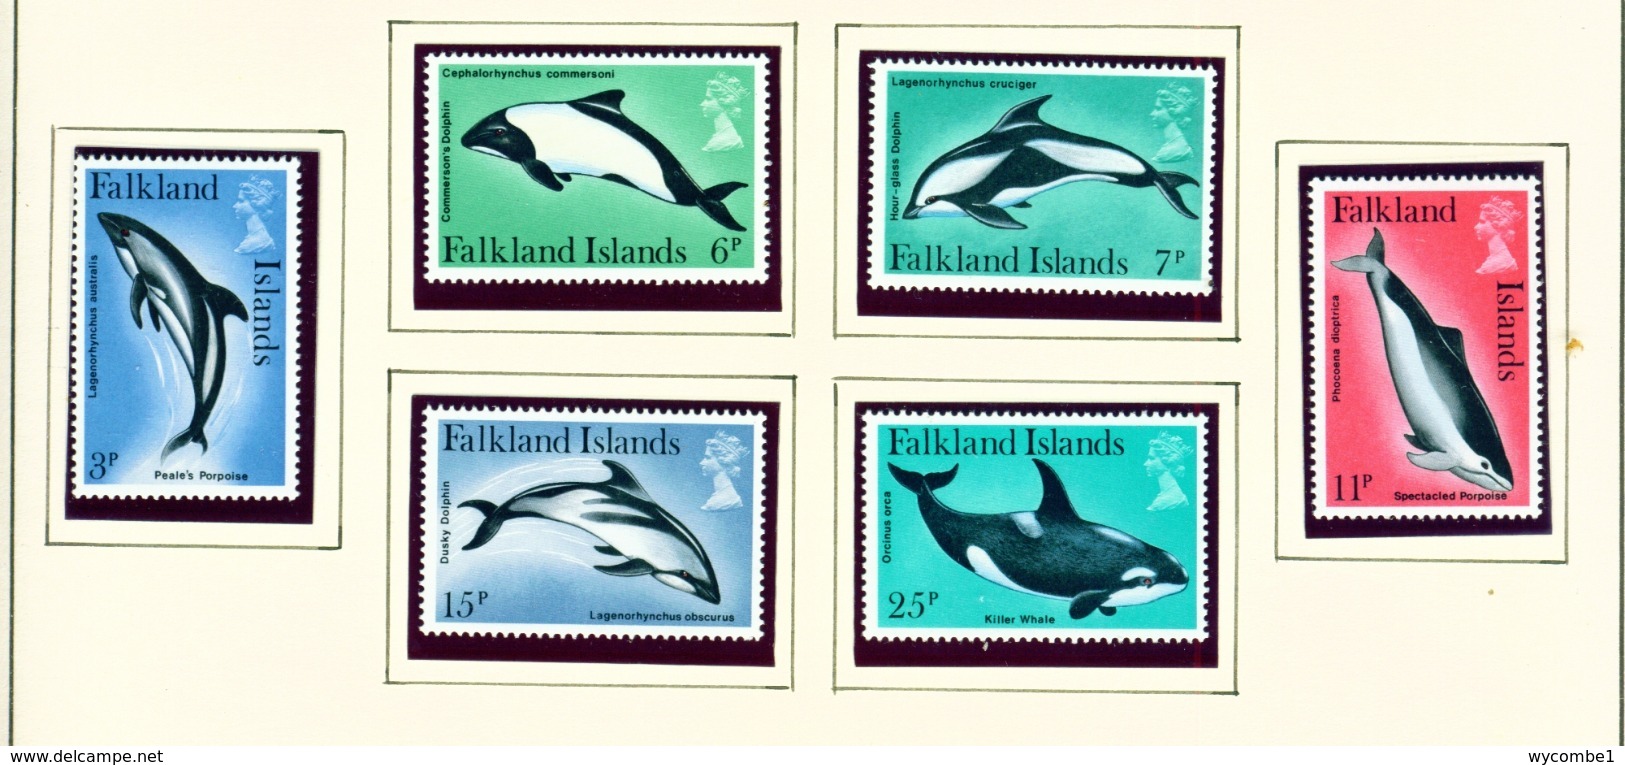 FALKLAND ISLANDS - 1980 Dolphins And Porpoises Set Unmounted/Never Hinged Mint - Falklandinseln